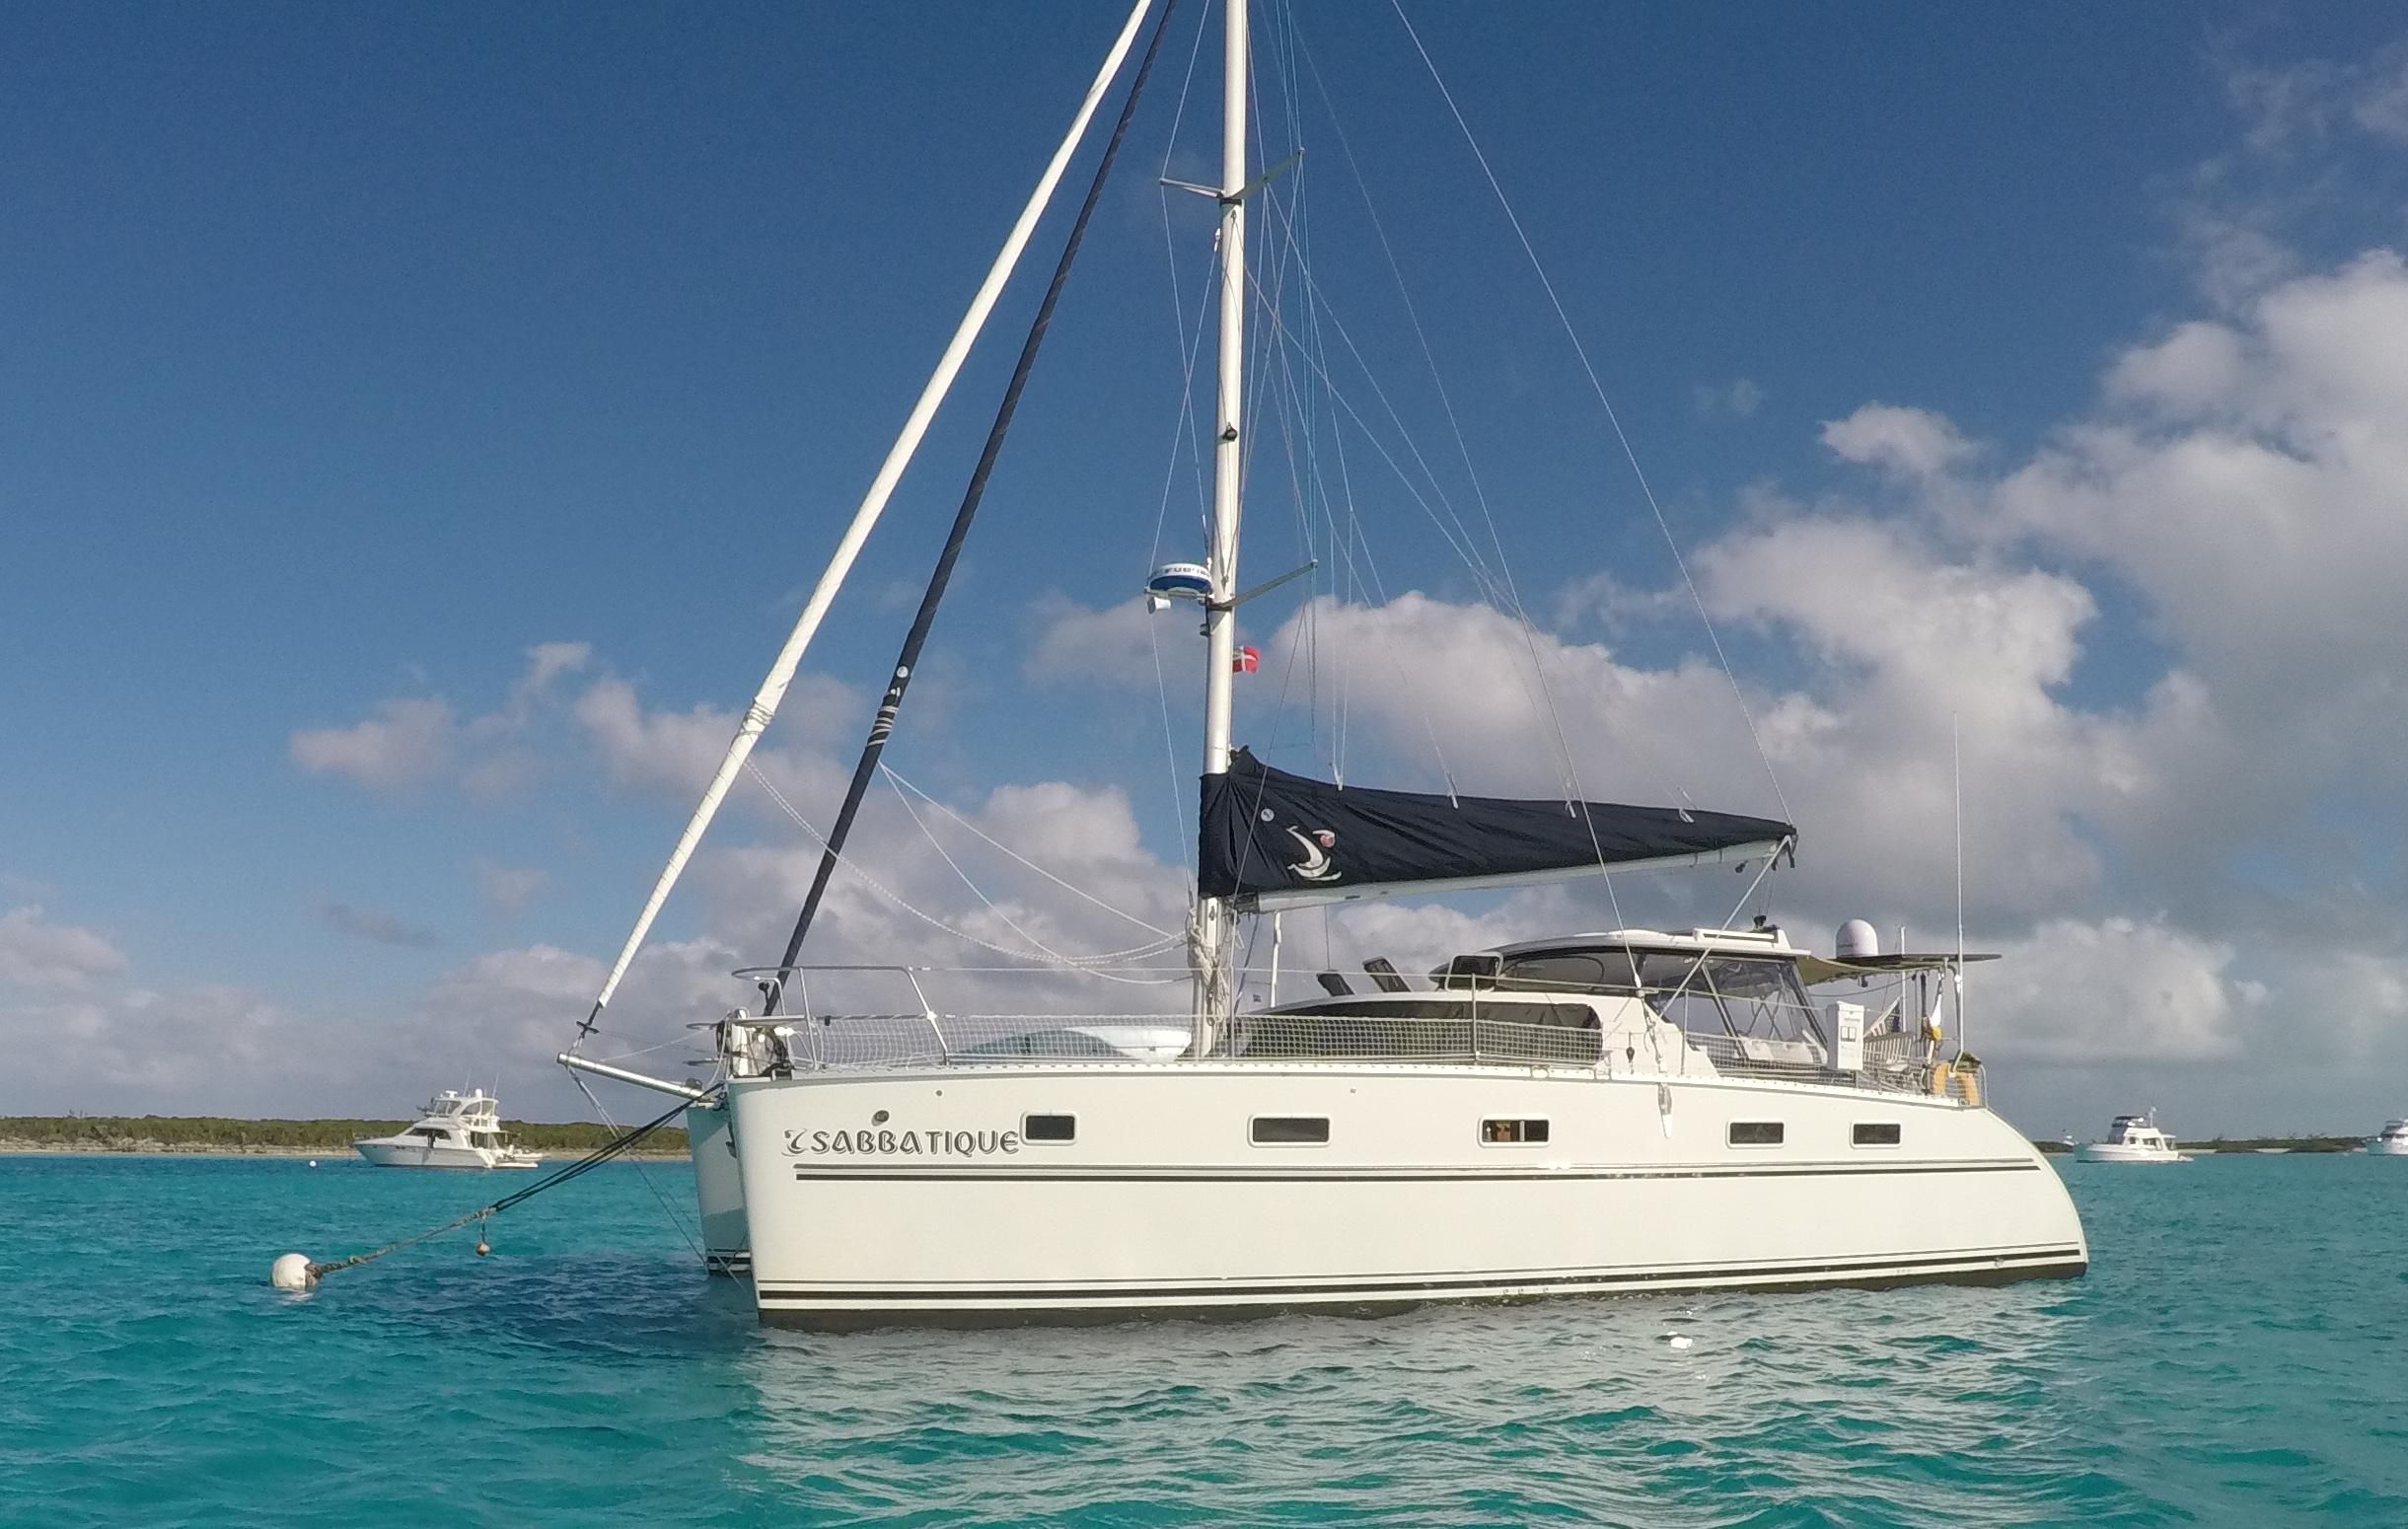 pdq catamaran for sale by owner